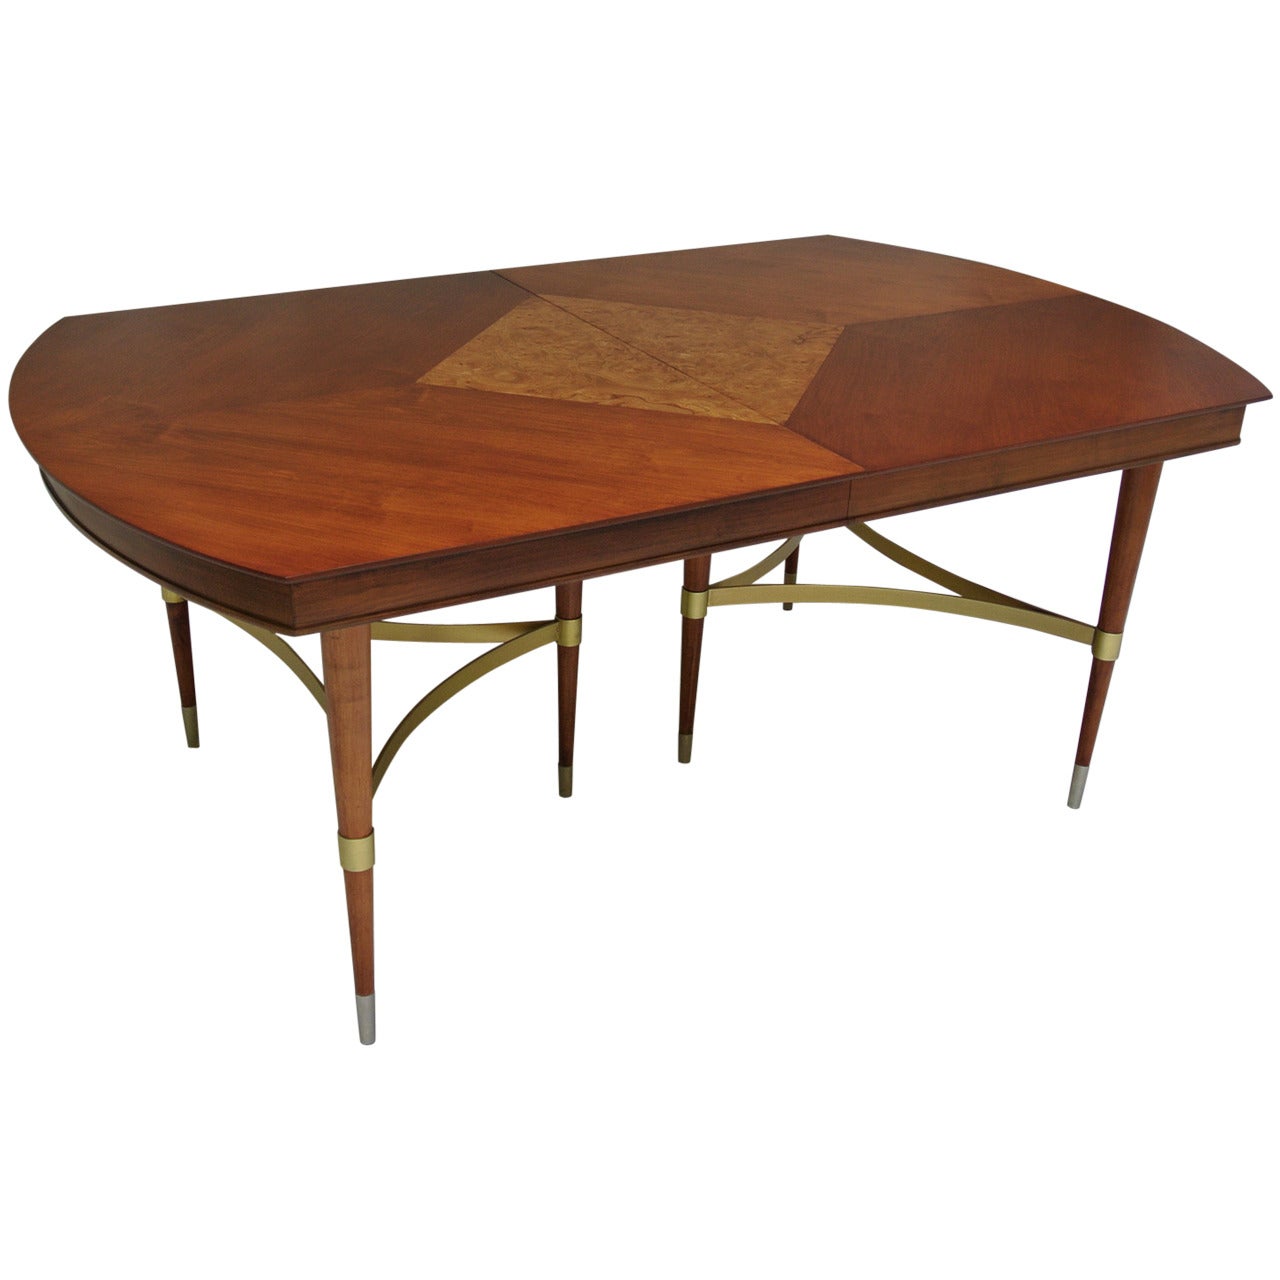 Bert England Forward Trend Collection Cherry wood and Brass Dining Table , 1958